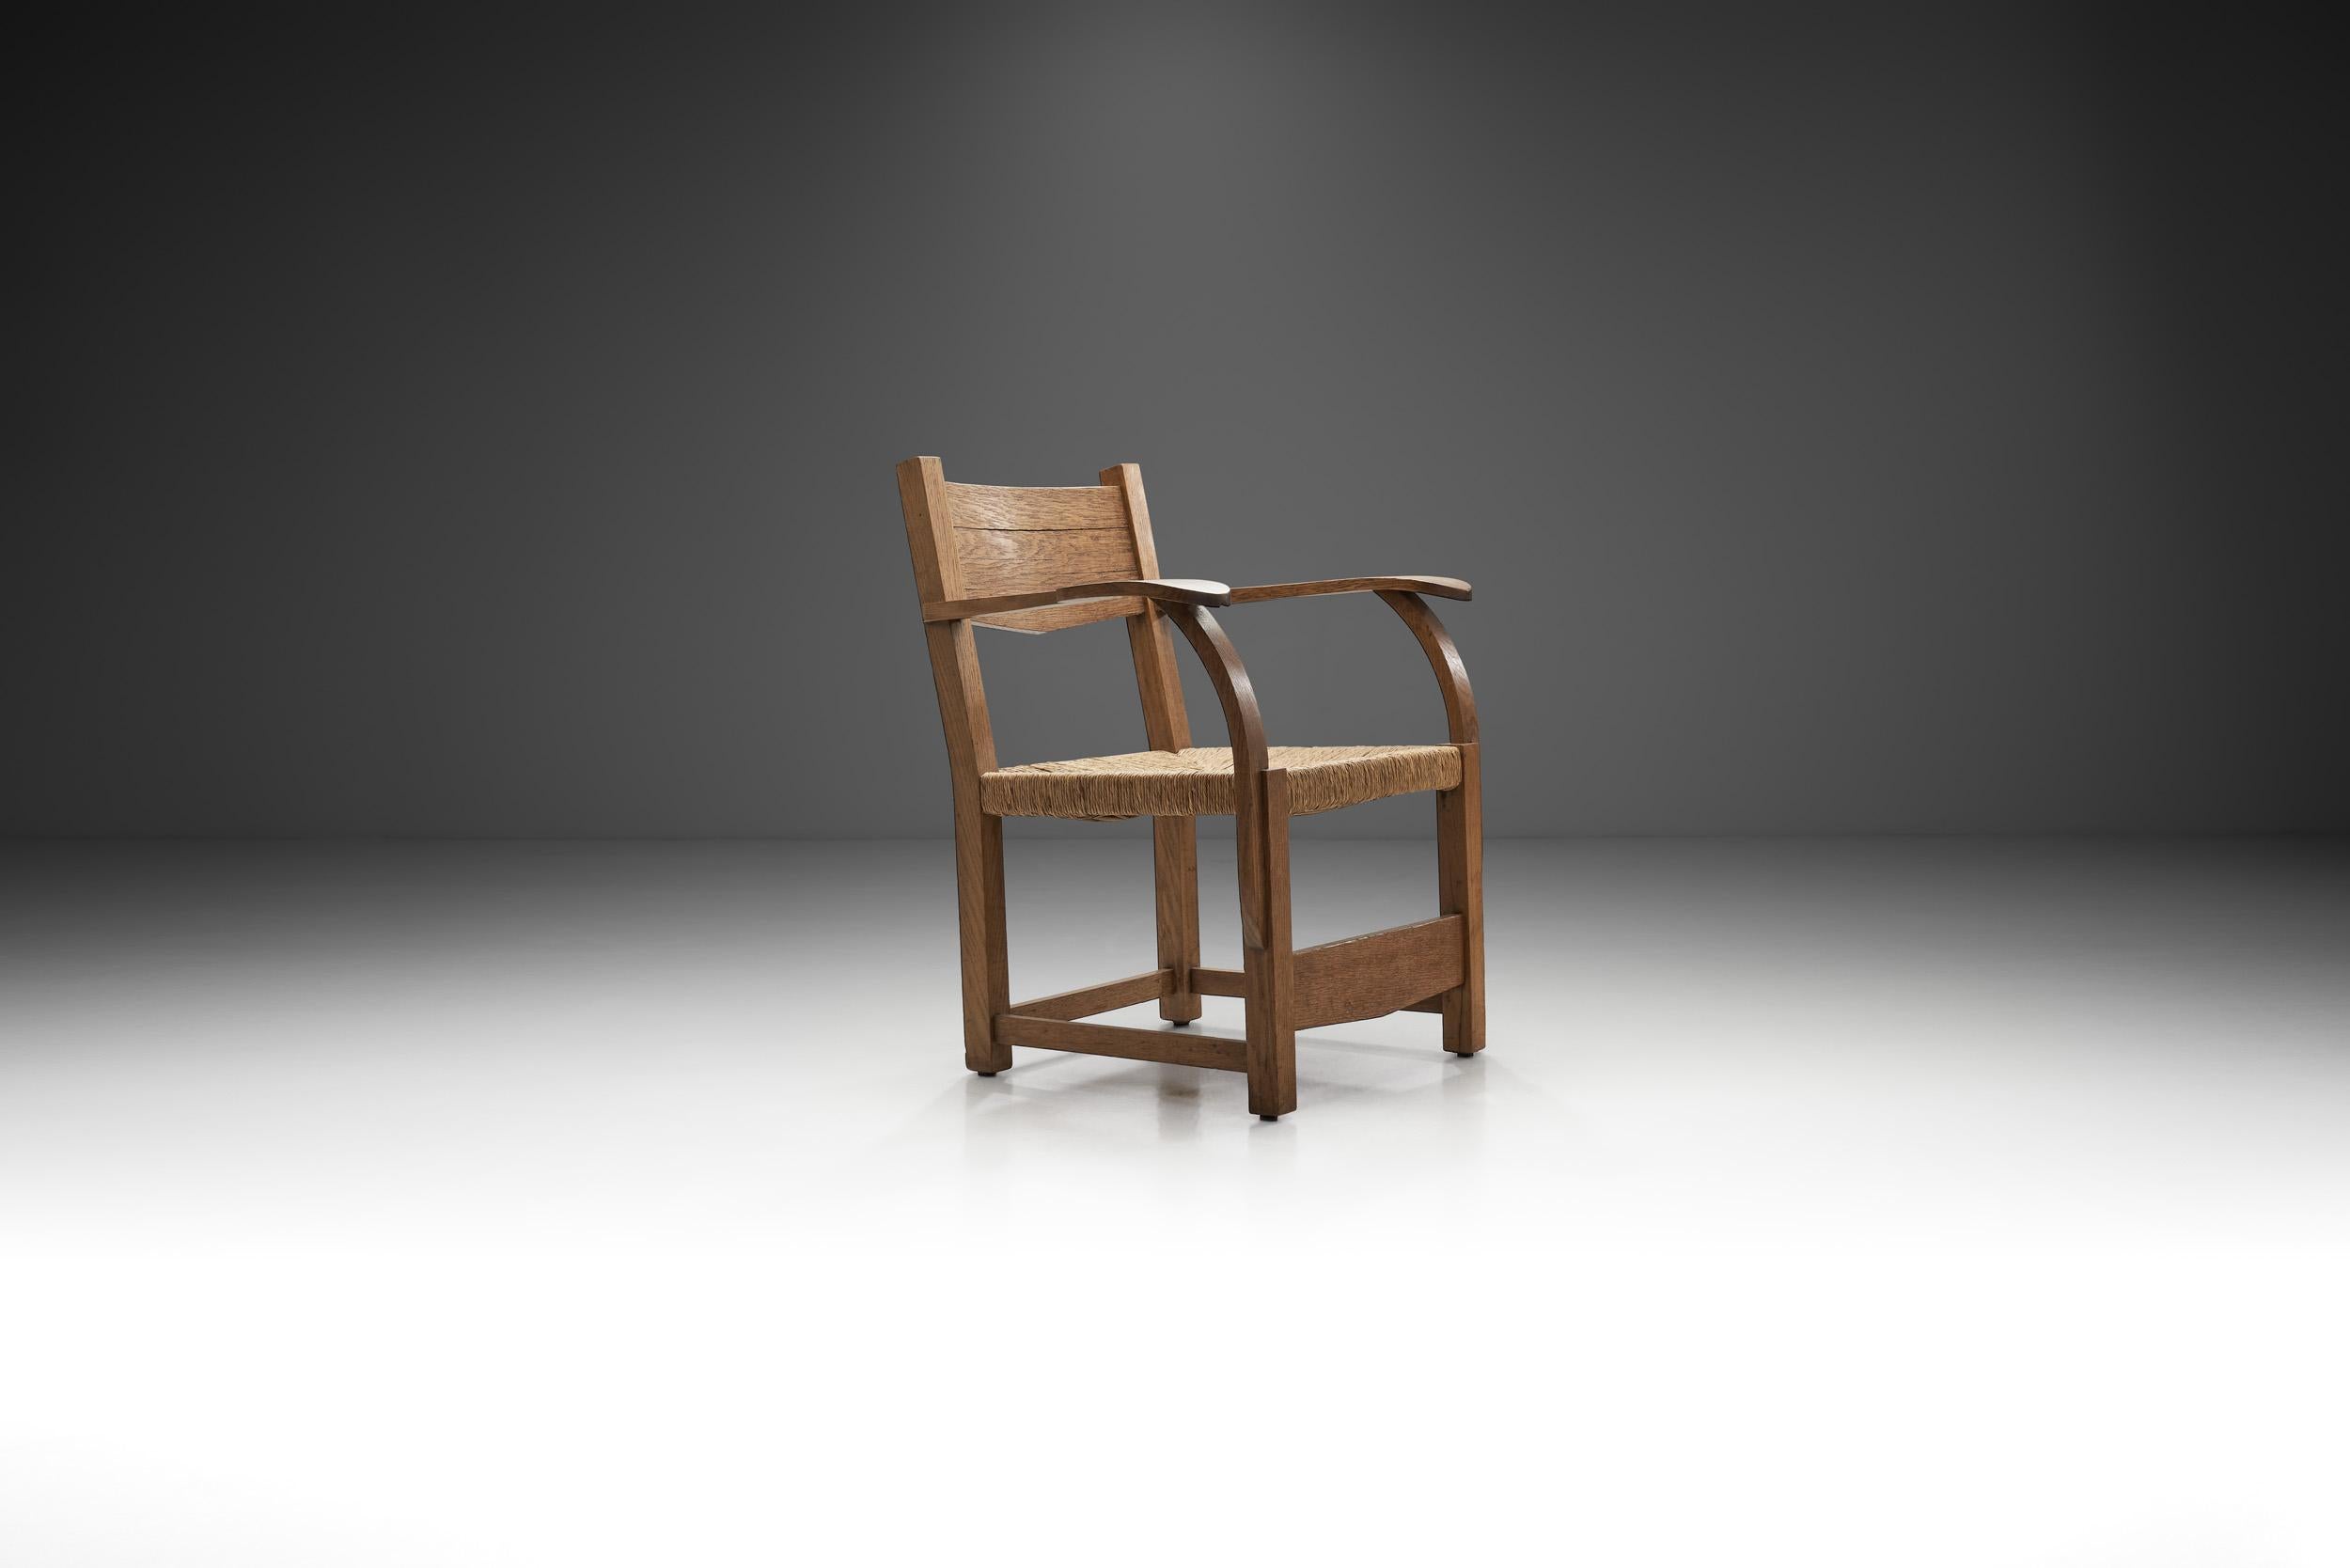 20th Century Oak Side Chair with Paper Cord Seat by a Danish Cabinetmaker, Denmark ca 1950s